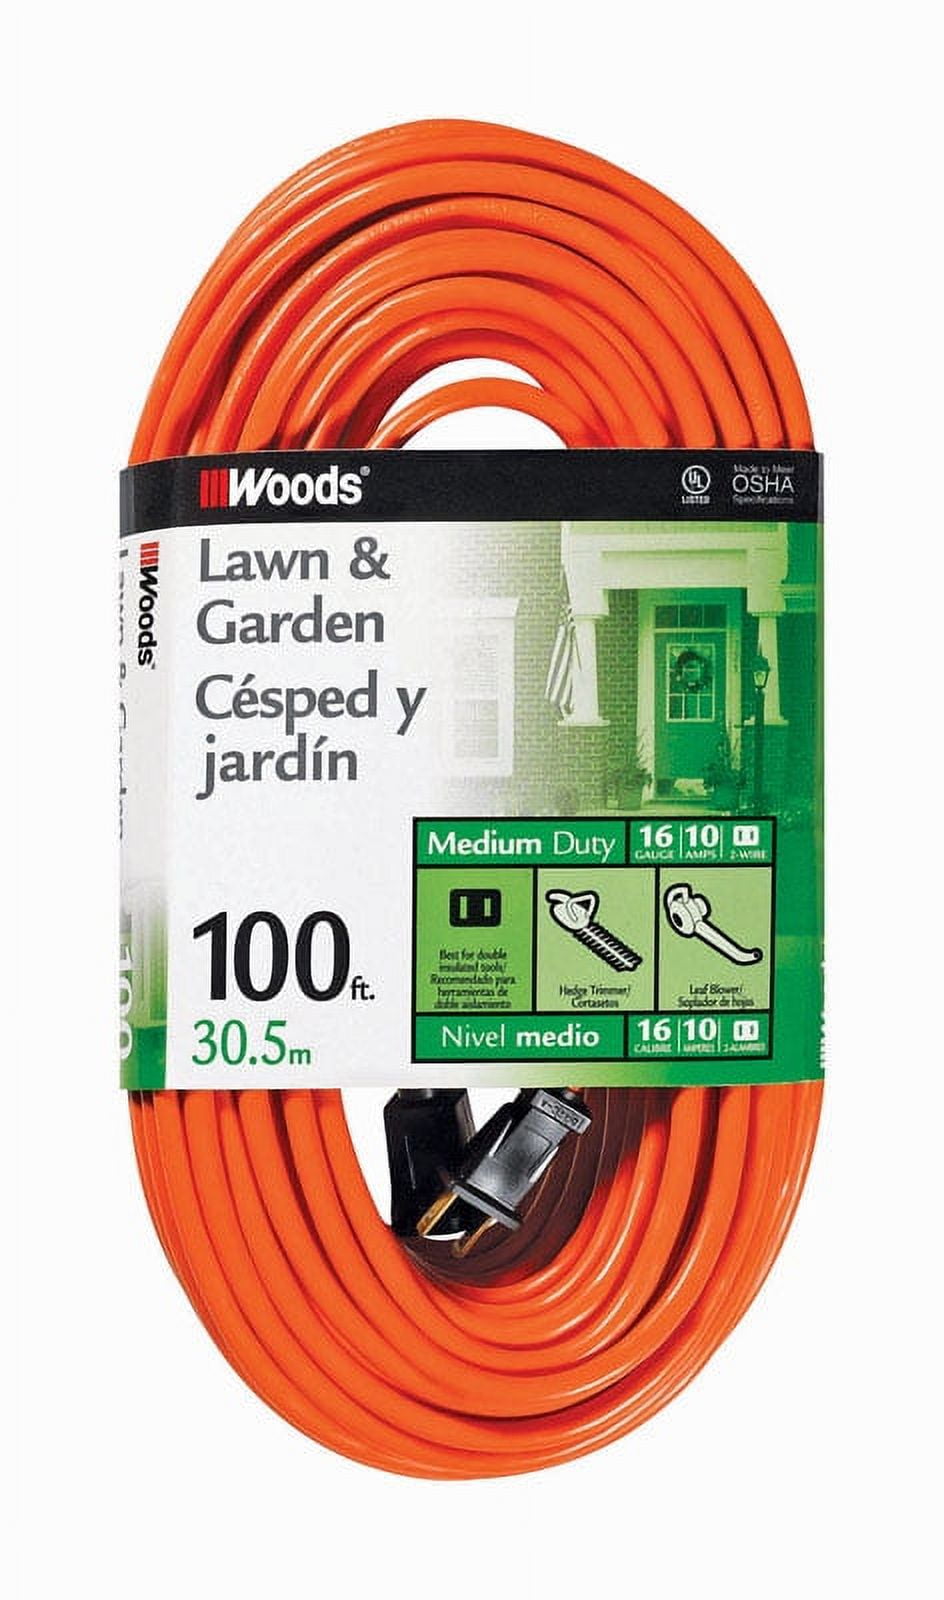 Complete Home Outdoor Extension Cord 40 ft Orange